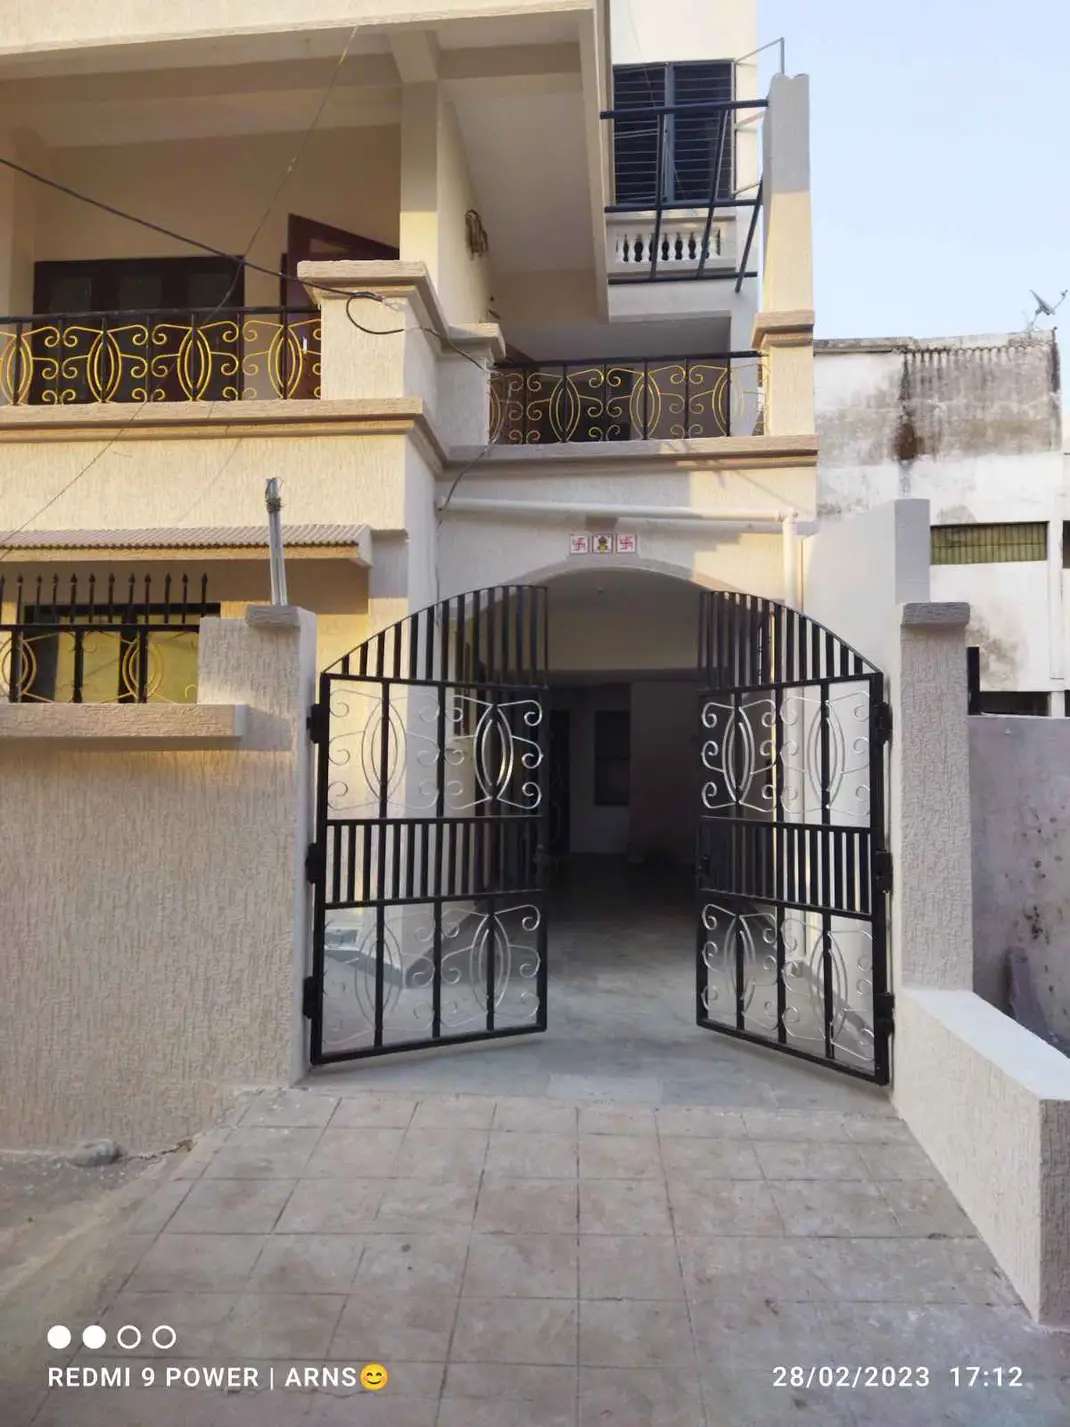 5+ Bed/ 5+ Bath Sell House/ Bungalow/ Villa; 1,500 sq. ft. lot for sale @Ayodhya bypass road Bhopal